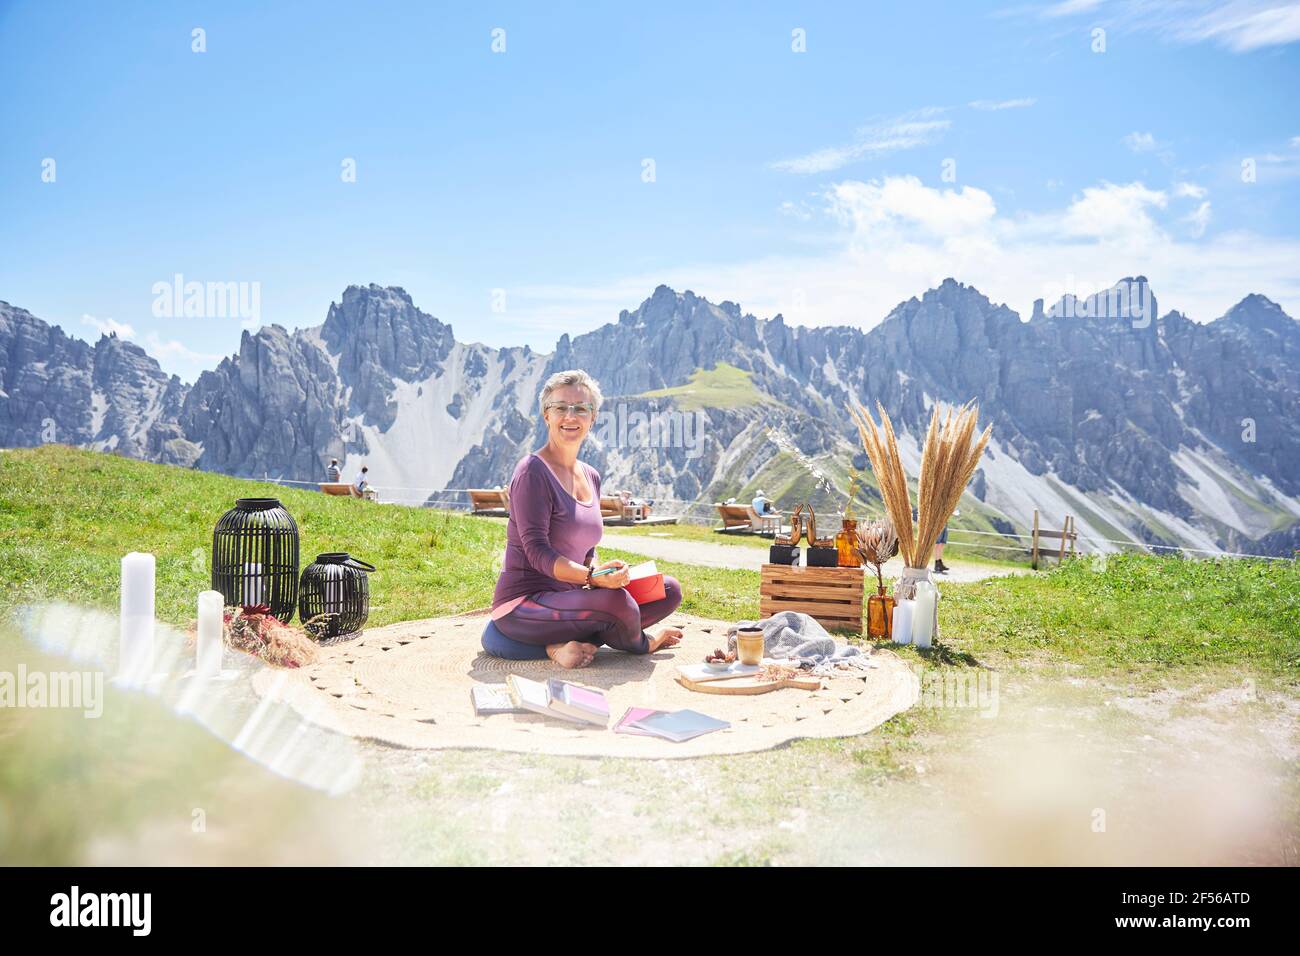 Smiling woman with book sitting on carpet against mountain Stock Photo